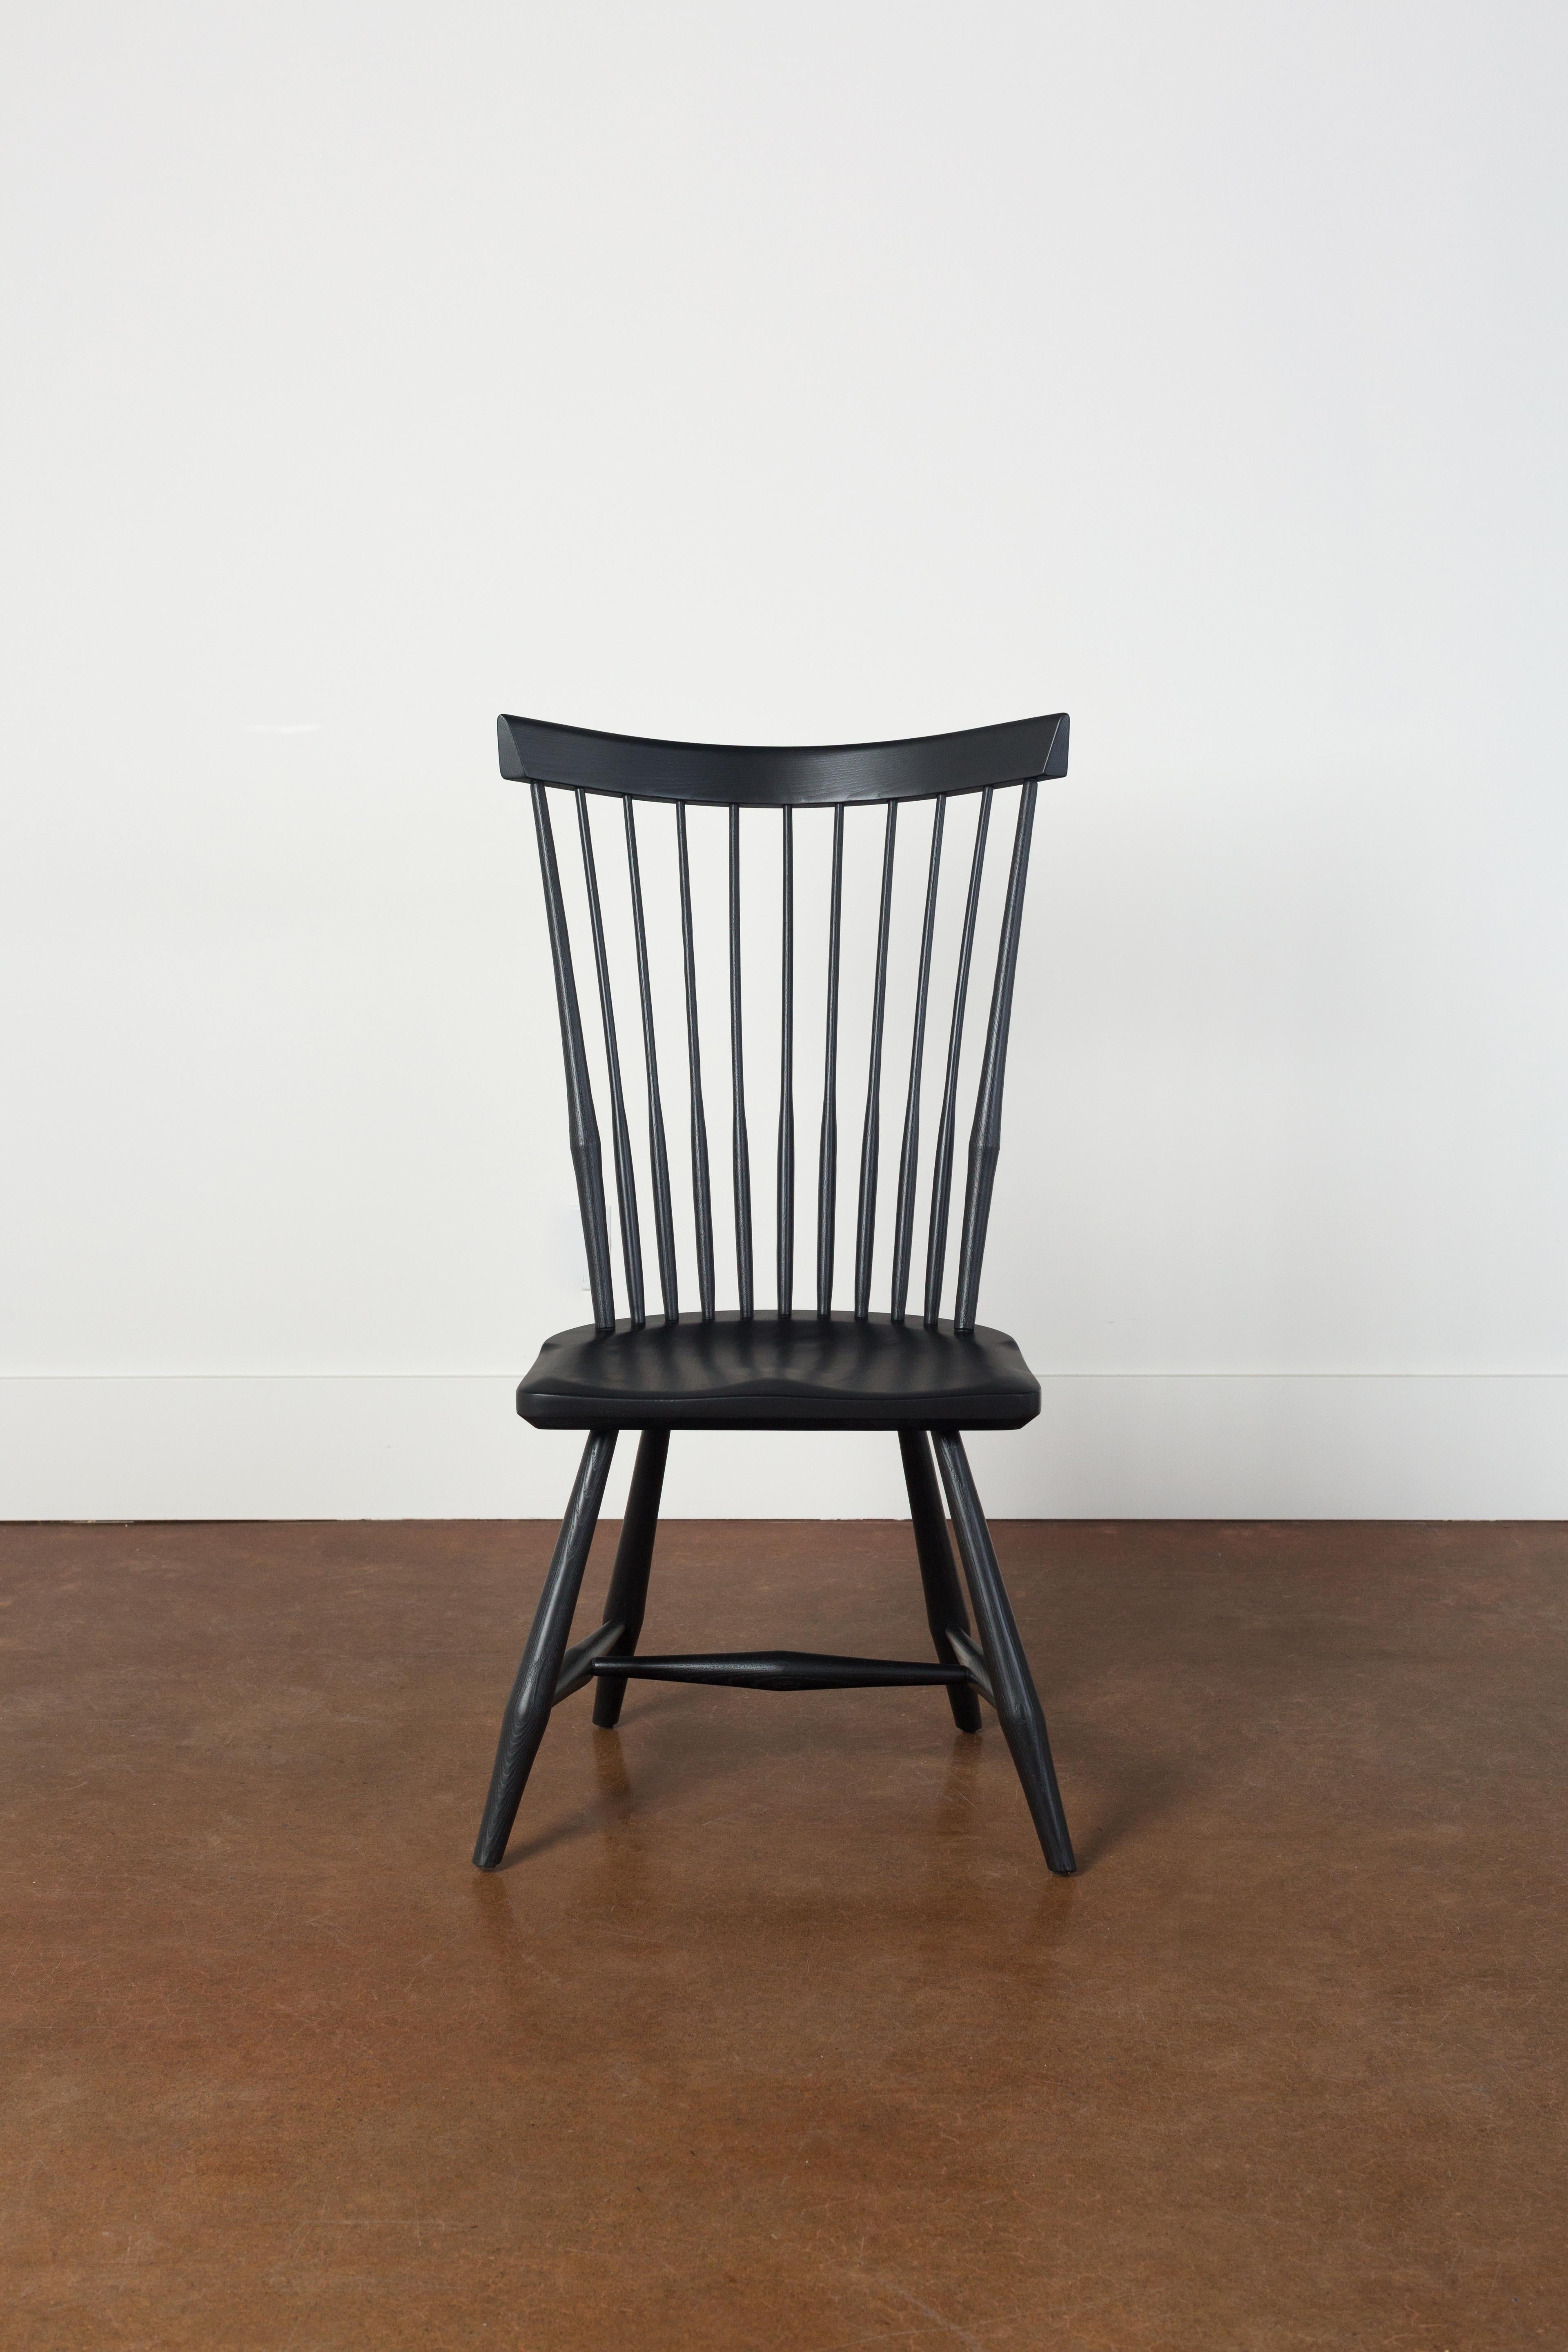 Our contemporary Windsor fan back side chair infuses a modern touch into a timeless design.

Inspired by the classic fan back Windsor chair, our contemporary design preserves the iconic fan-shaped backrest with spindles and gracefully curved top